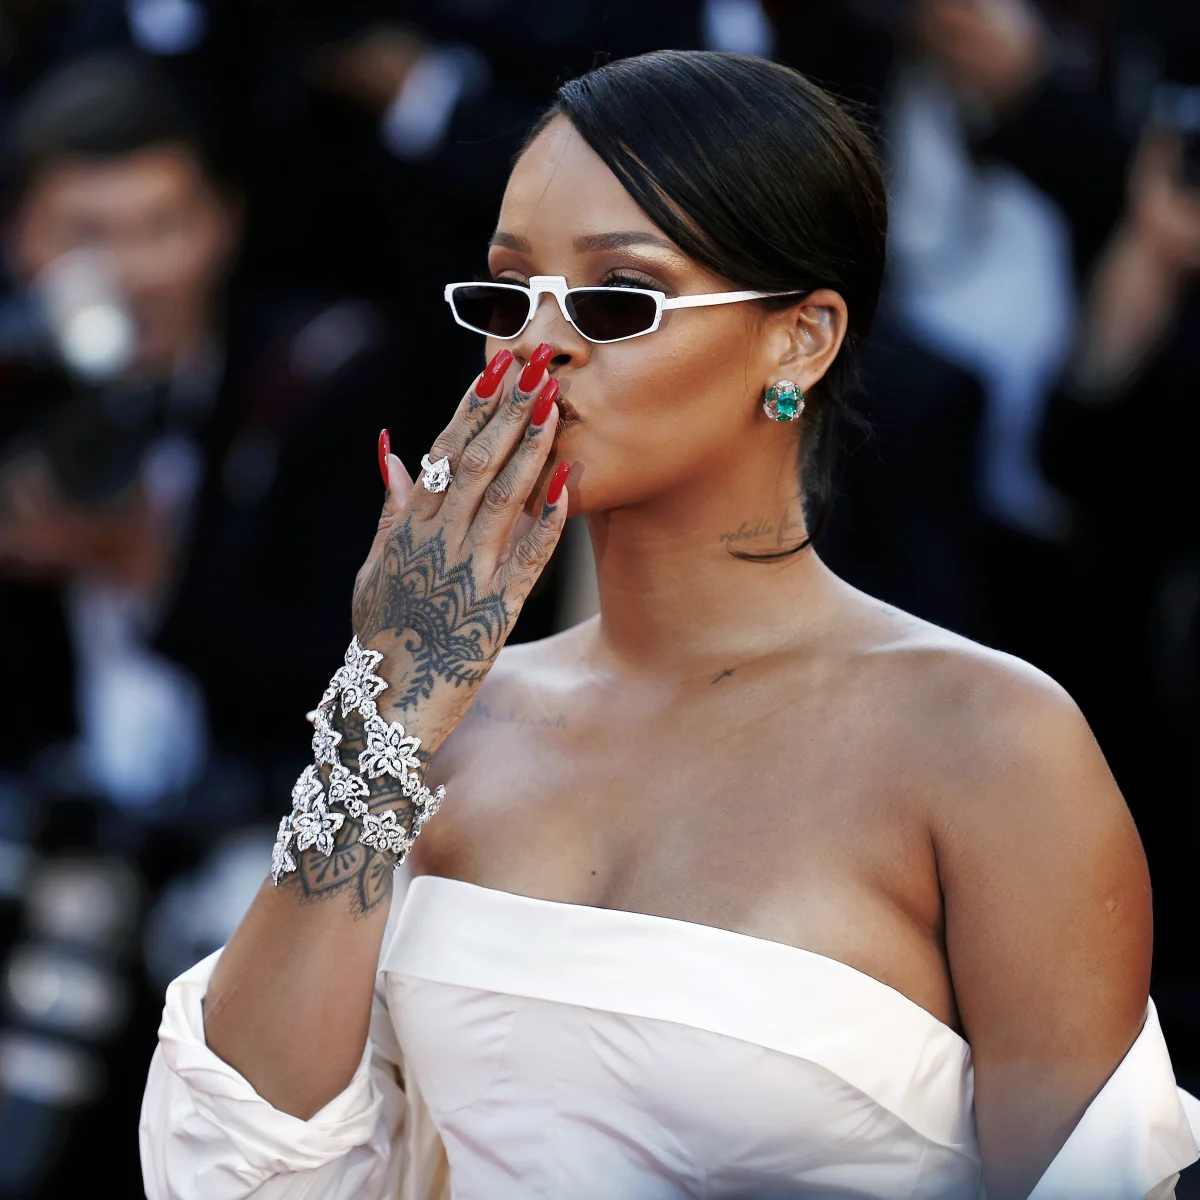 A Guide To All 26 Rihanna Tattoos – 2023 Edition With Cover ups and Updates